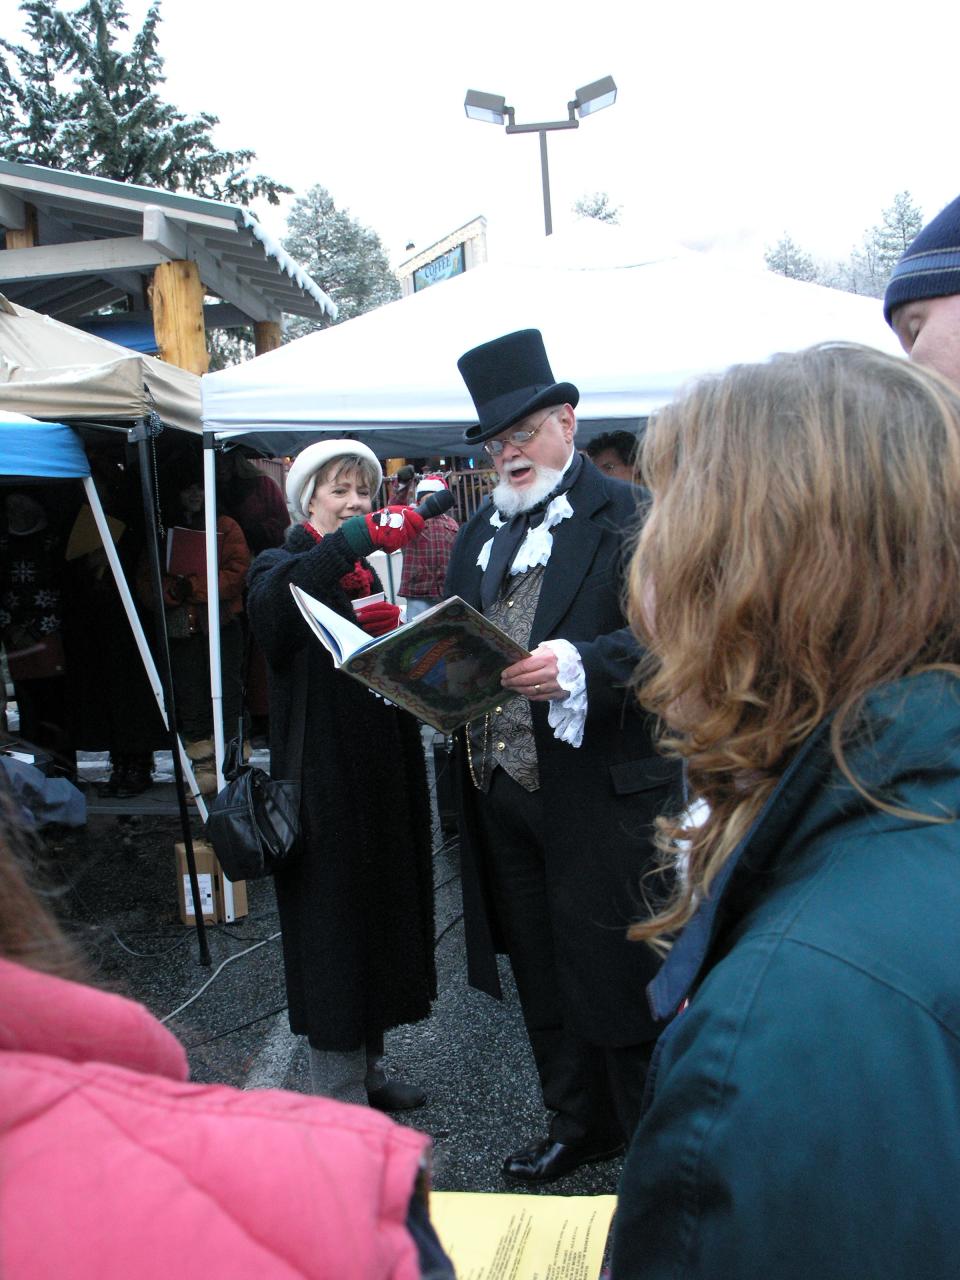 Doug Austin reading from his antique copy of " 'Twas the Night Before Christmas" to the crowd at the 2009 Tree Lighting Festival in Idyllwild.